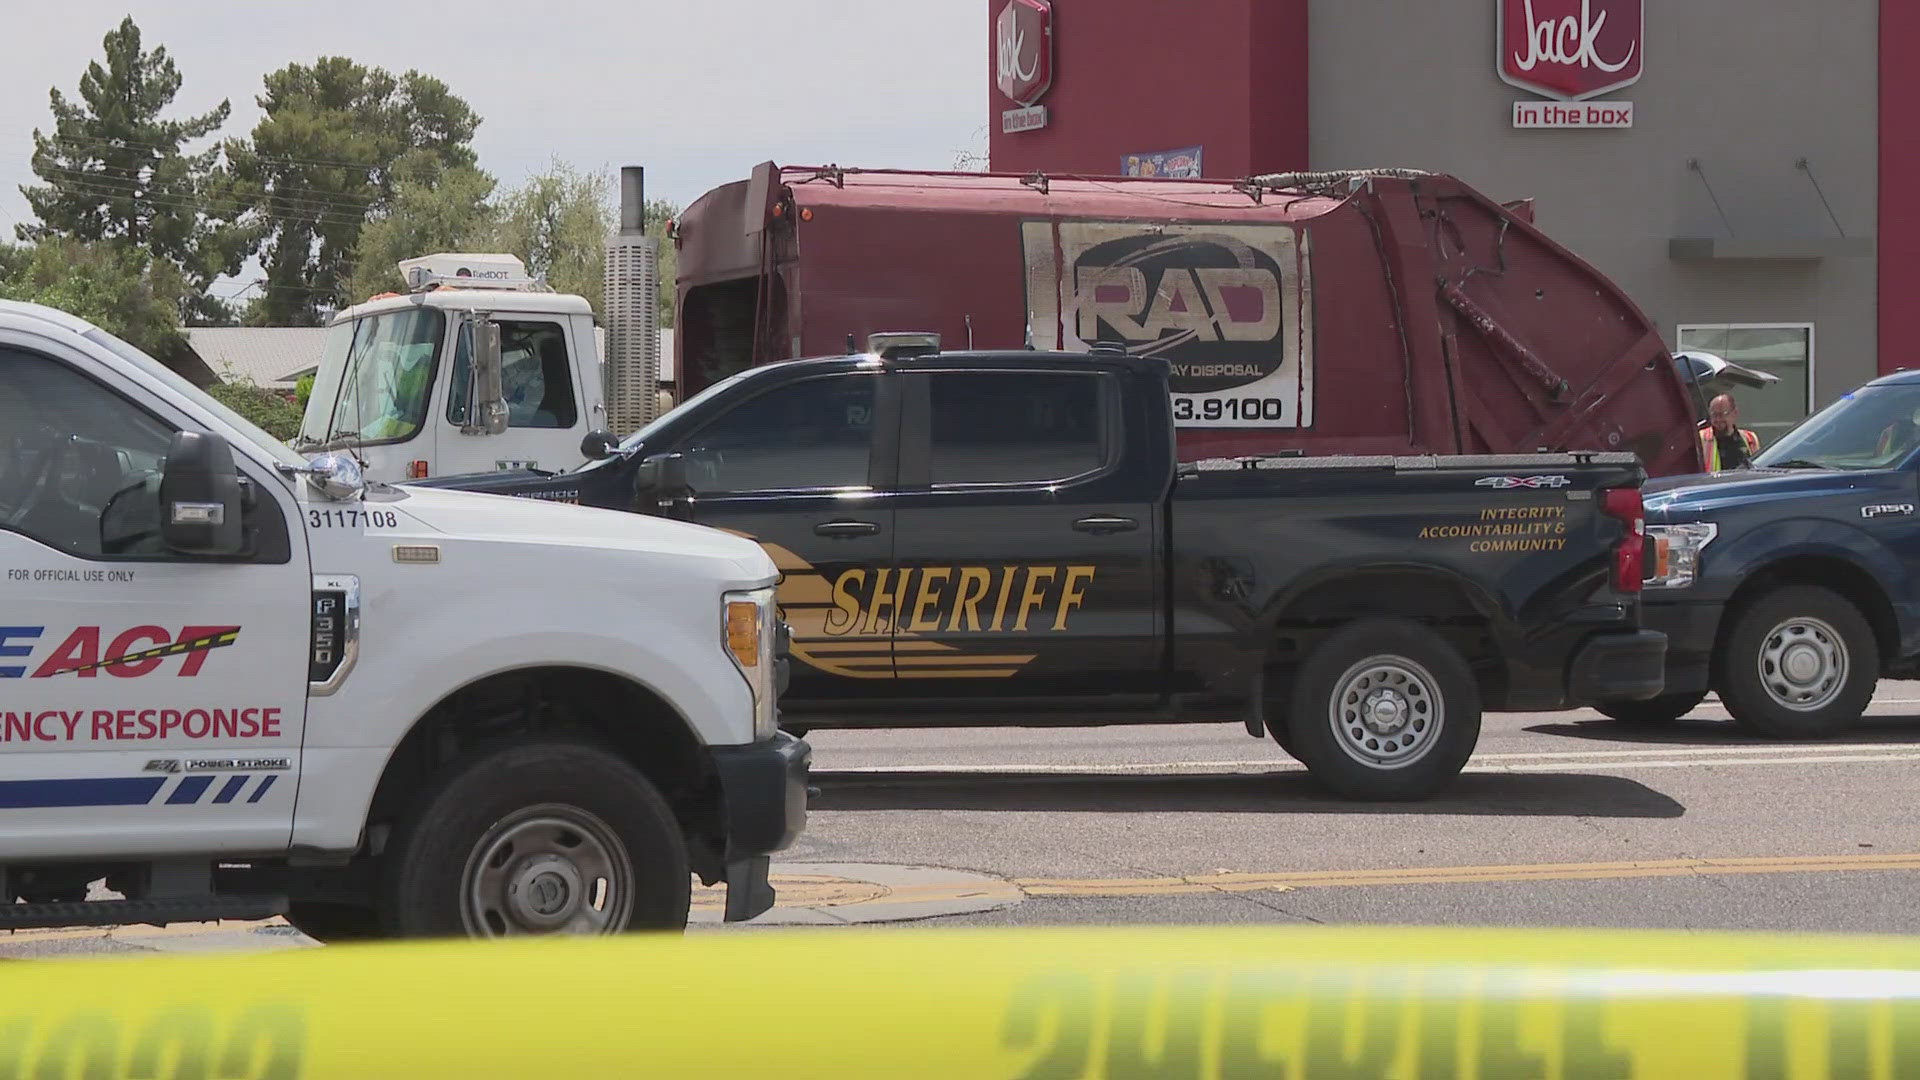 The 39-year-old was struck near Broadway and Ellsworth roads in the East Valley.